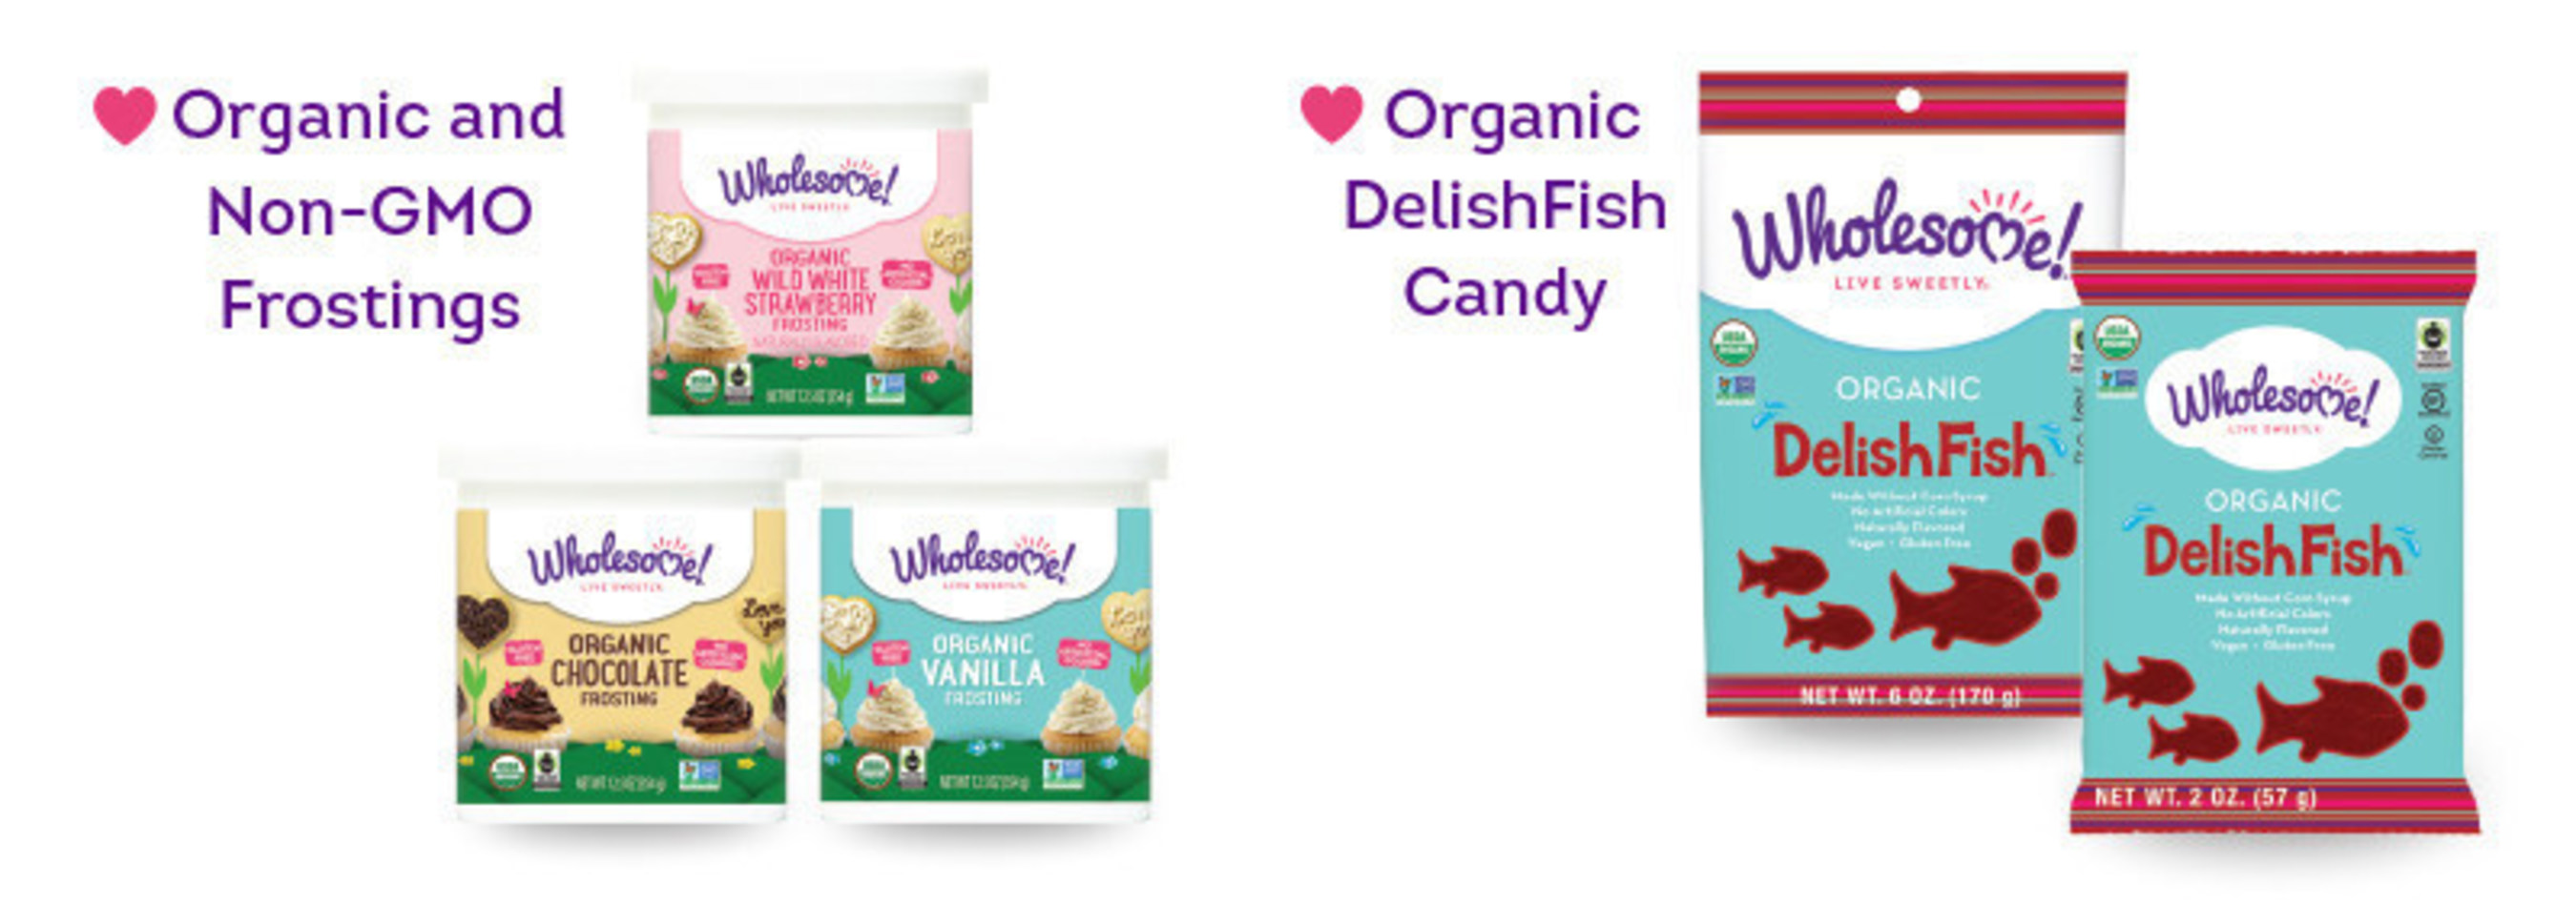 The Wholesome! line of Organic, Non-GMO Frostings remove the stress of last minute baking. These frostings are convenient, ready-to-use and free of artificial preservatives and flavors. They are also vegan, gluten-free and kosher making them an easy baking solution for every kind of sweet tooth and occasion. Wholesome! is also launching Organic DelishFish, an organic version of a popular fish-shaped candy. The candy is made with organic, clean ingredients and free of corn syrup, artificial colors and flavors. They are the perfect snack for road trips, movie nights and lunchbox surprises.